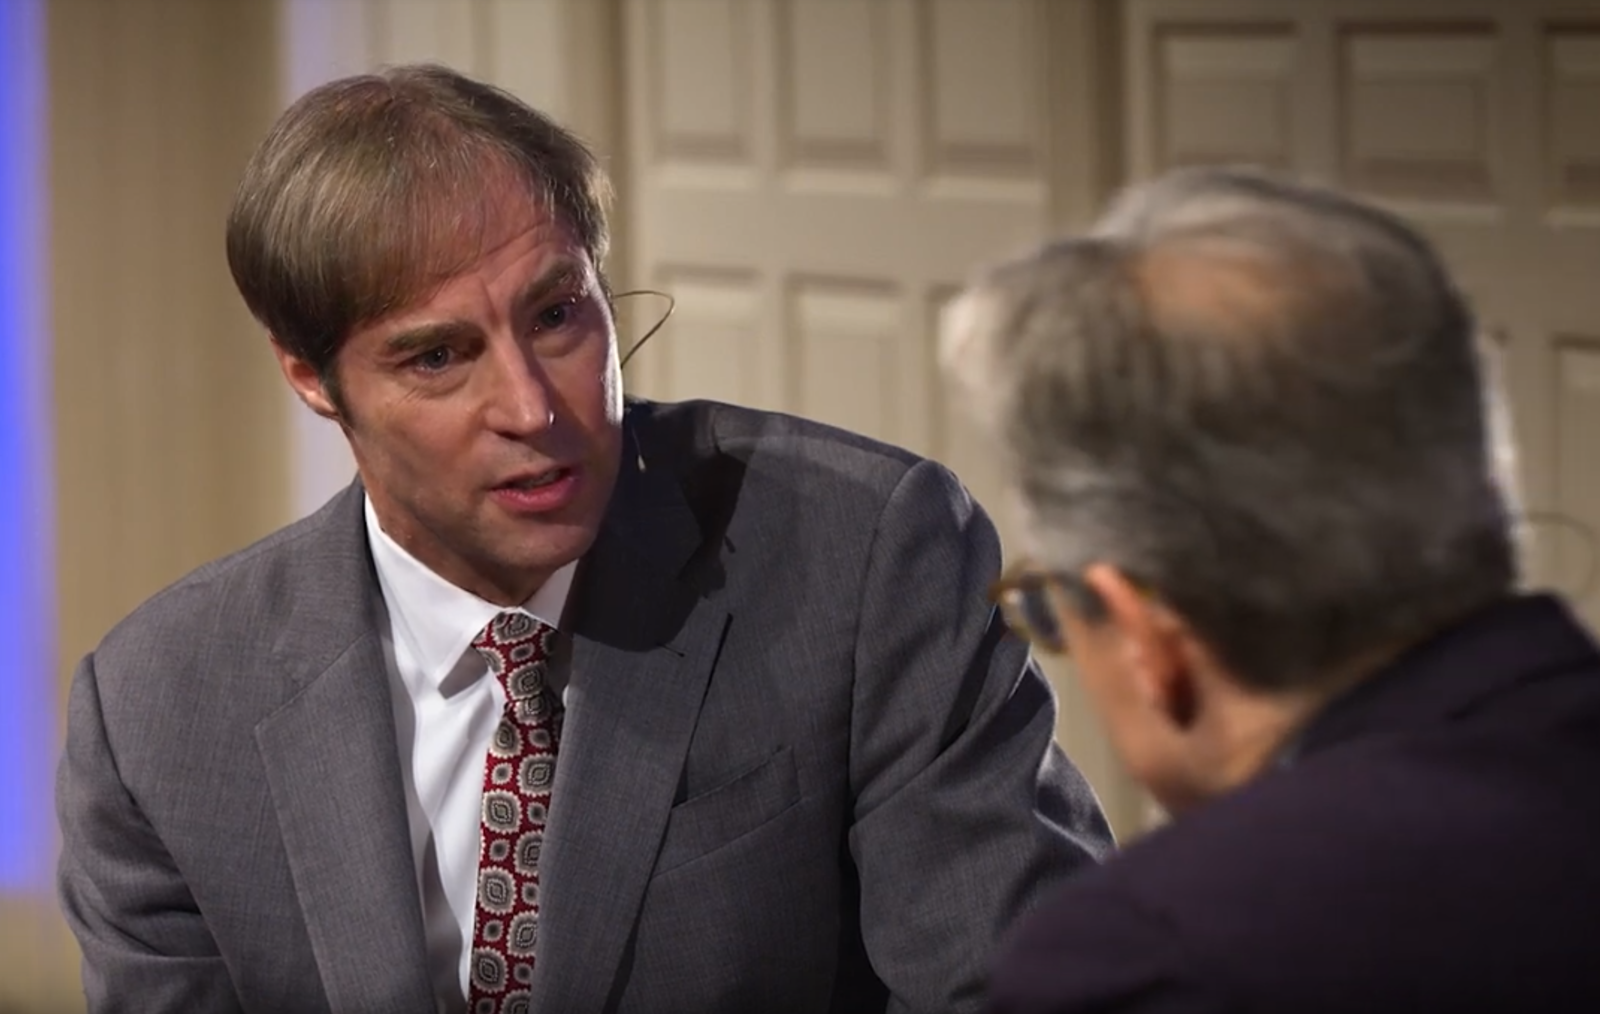 Stephen Meyer speaks with Eric Metaxas at 2019 Dallas Science and Faith Conference at Park Cities Baptist Church in Dallas sponsored by Discovery Institute’s Center for Science and Culture